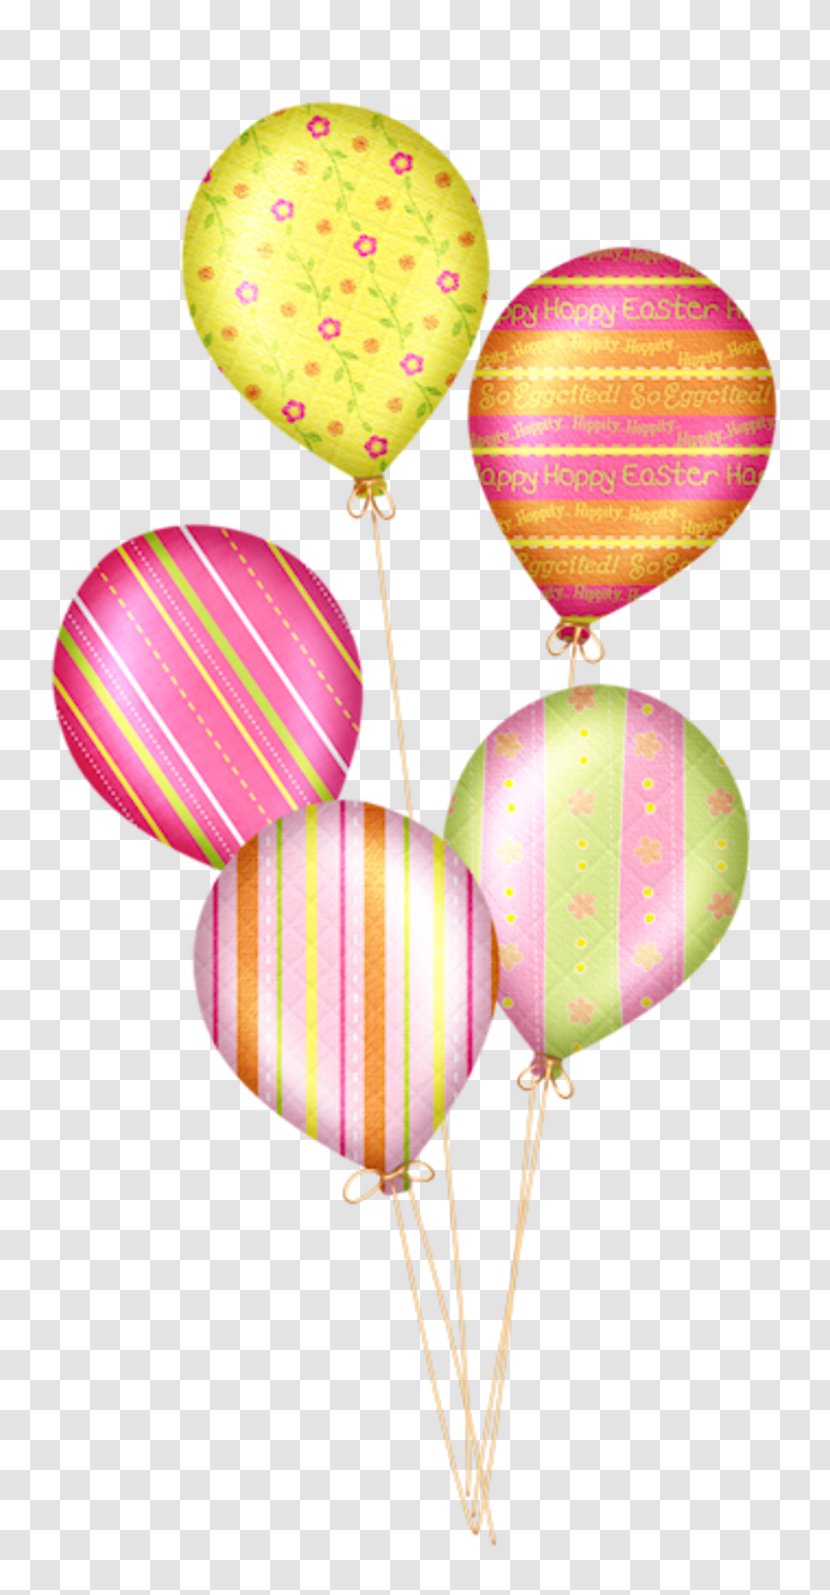 Birthday Cake Balloon Happy To You Clip Art - Sit Hot Air Easter Transparent PNG